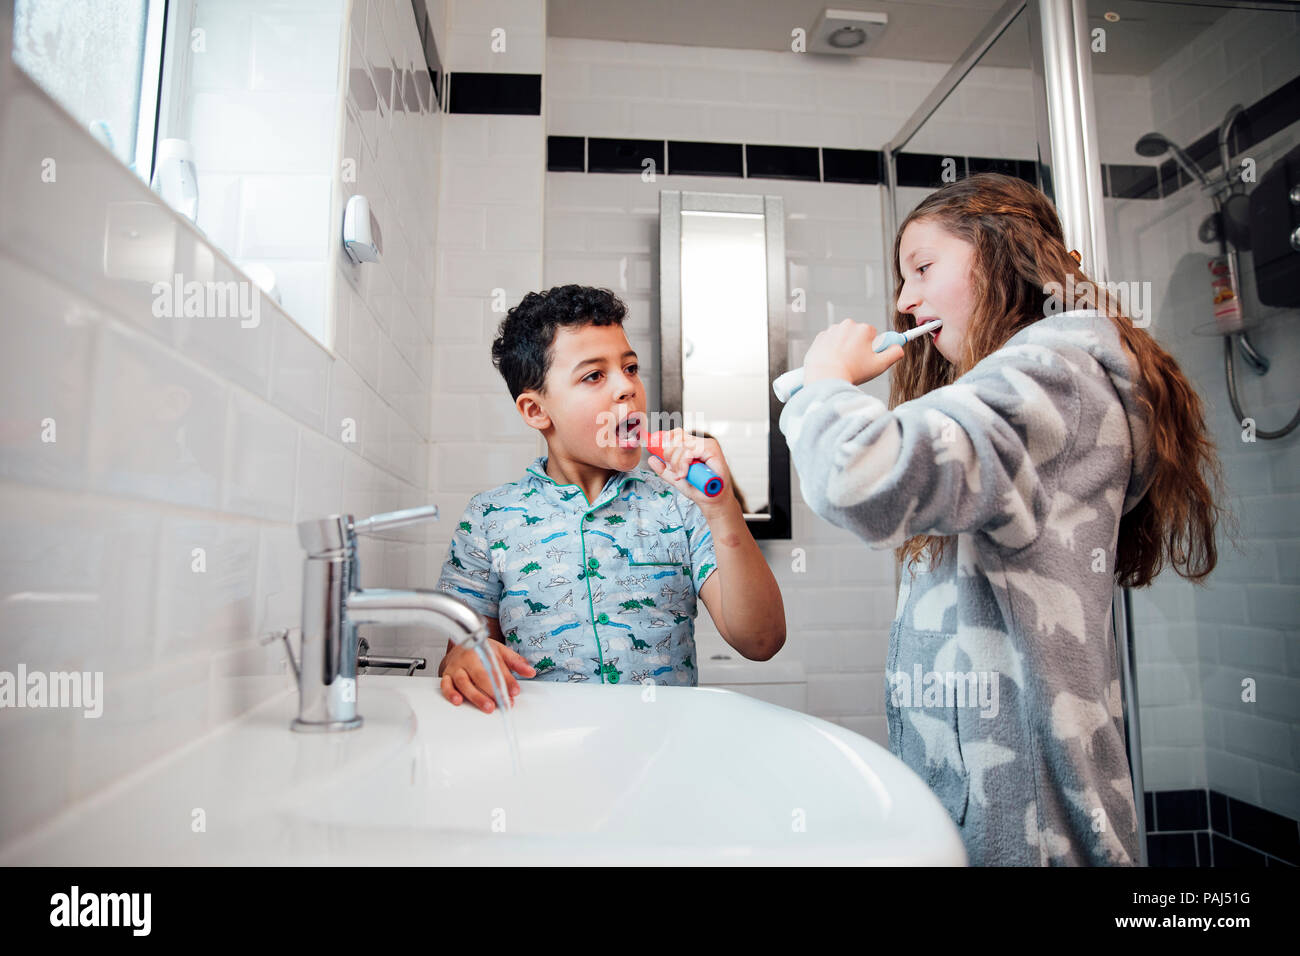 Little boy and his older sister are brushing their teeth together in the bathroom at home. Stock Photo